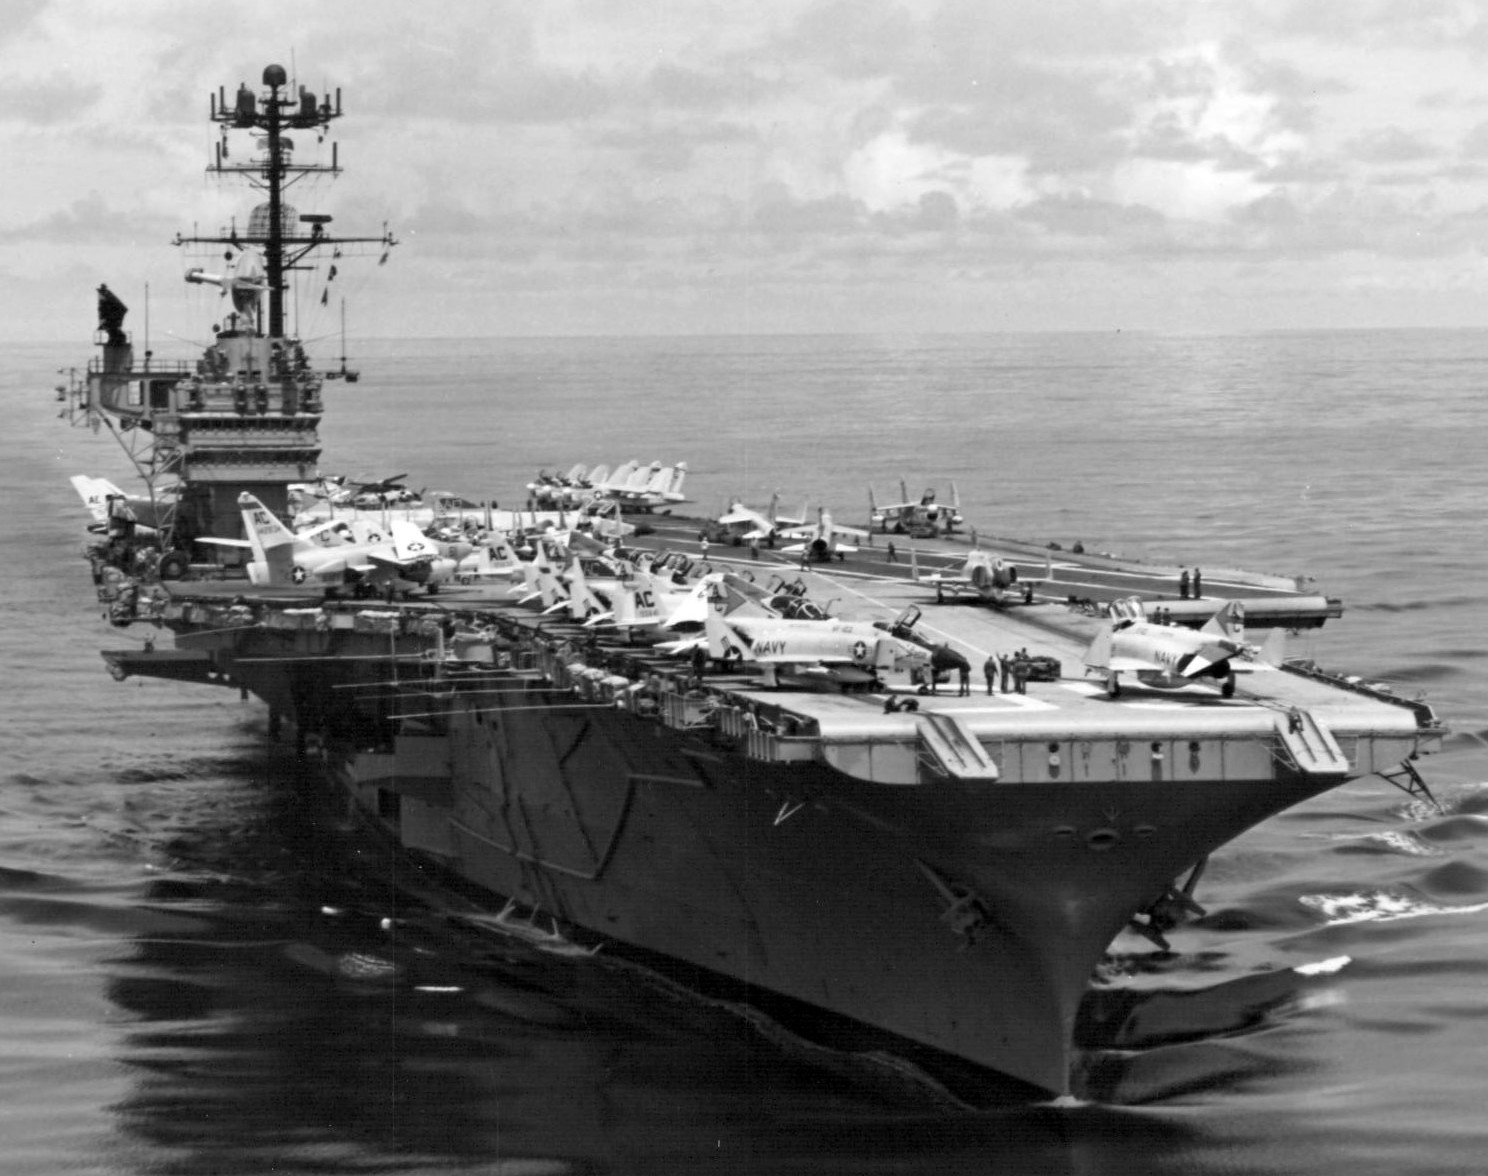 cvw-3 carrier air wing us navy uss saratoga cva-60 embarked squadrons 37